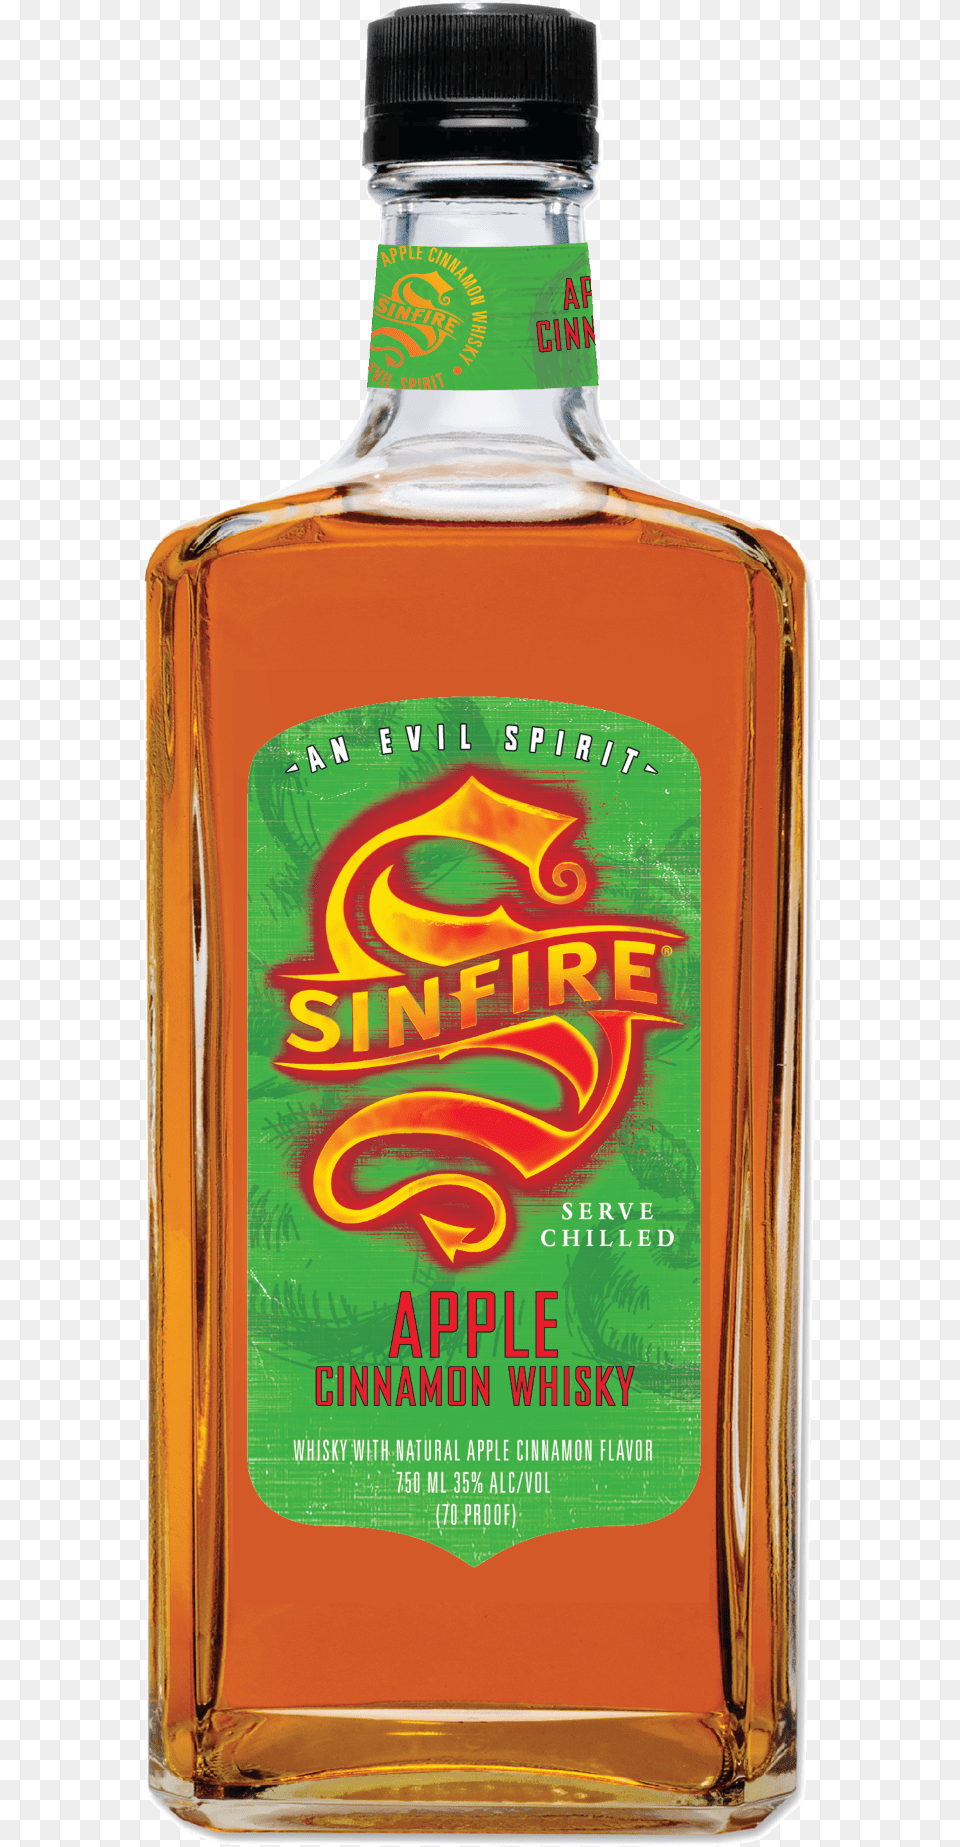 Can You Out Fireball Fireball By Adding Apples To The Sinfire Apple Cinnamon Whiskey, Alcohol, Beverage, Liquor, Bottle Free Png